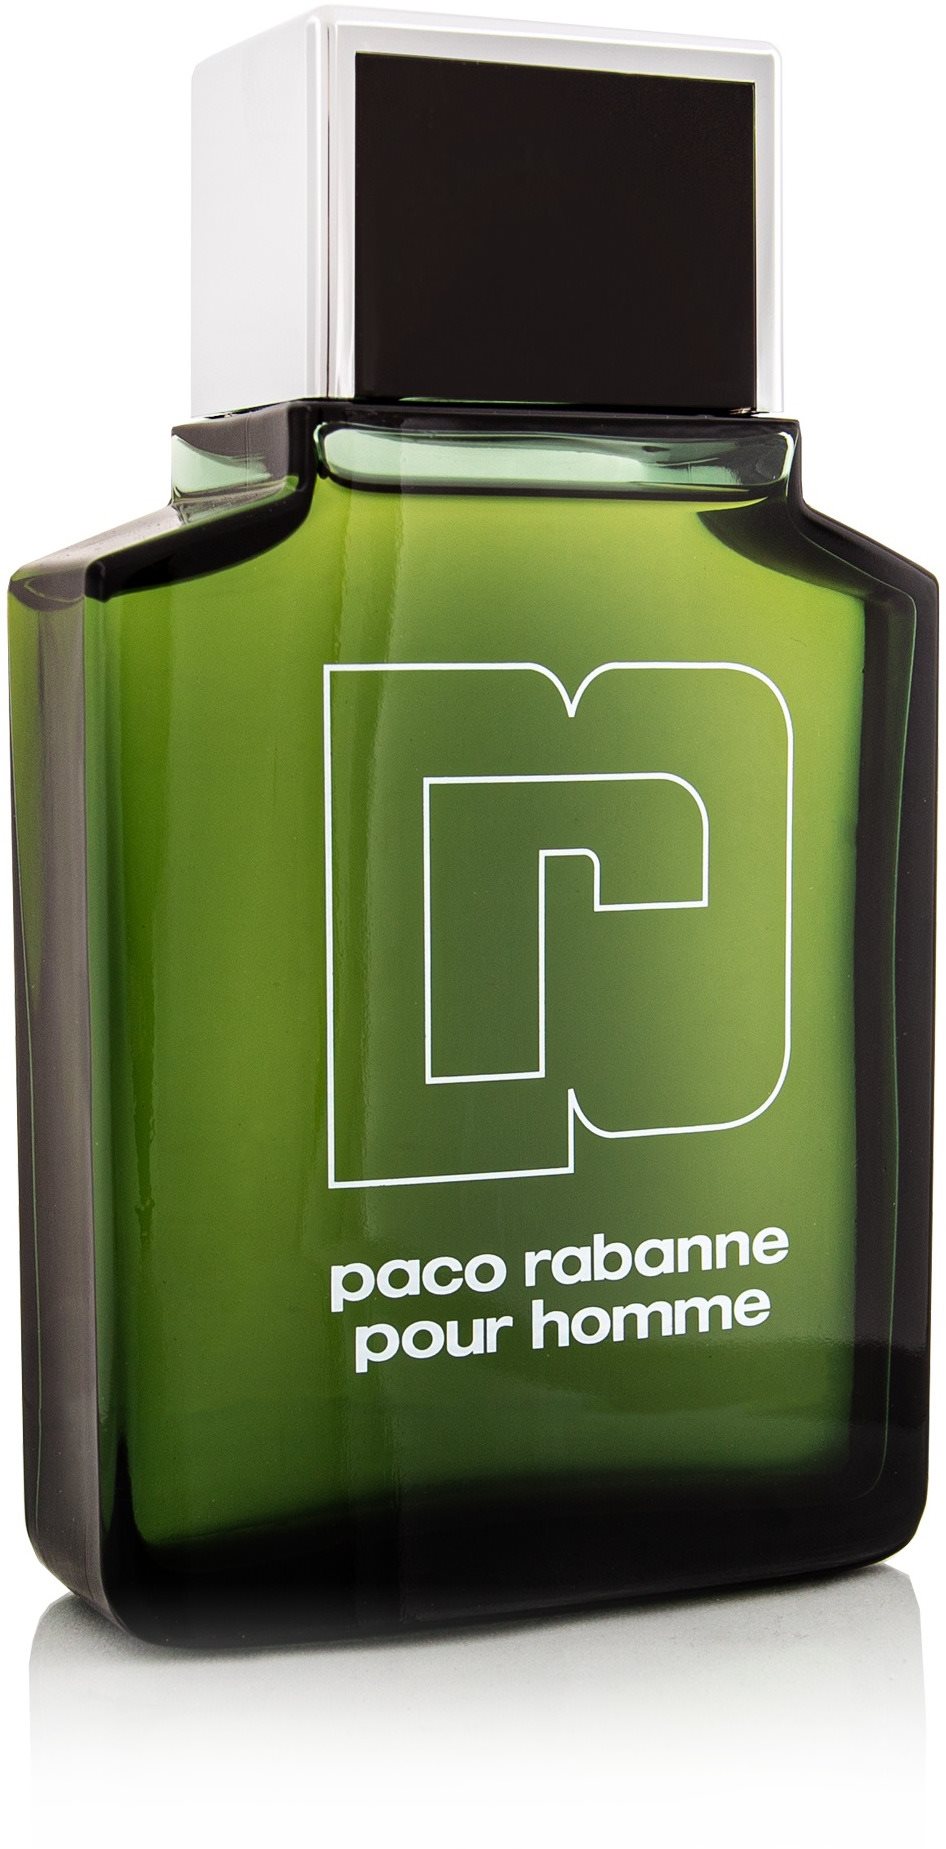 PACO RABANNE Pour Homme EdT 200 ml